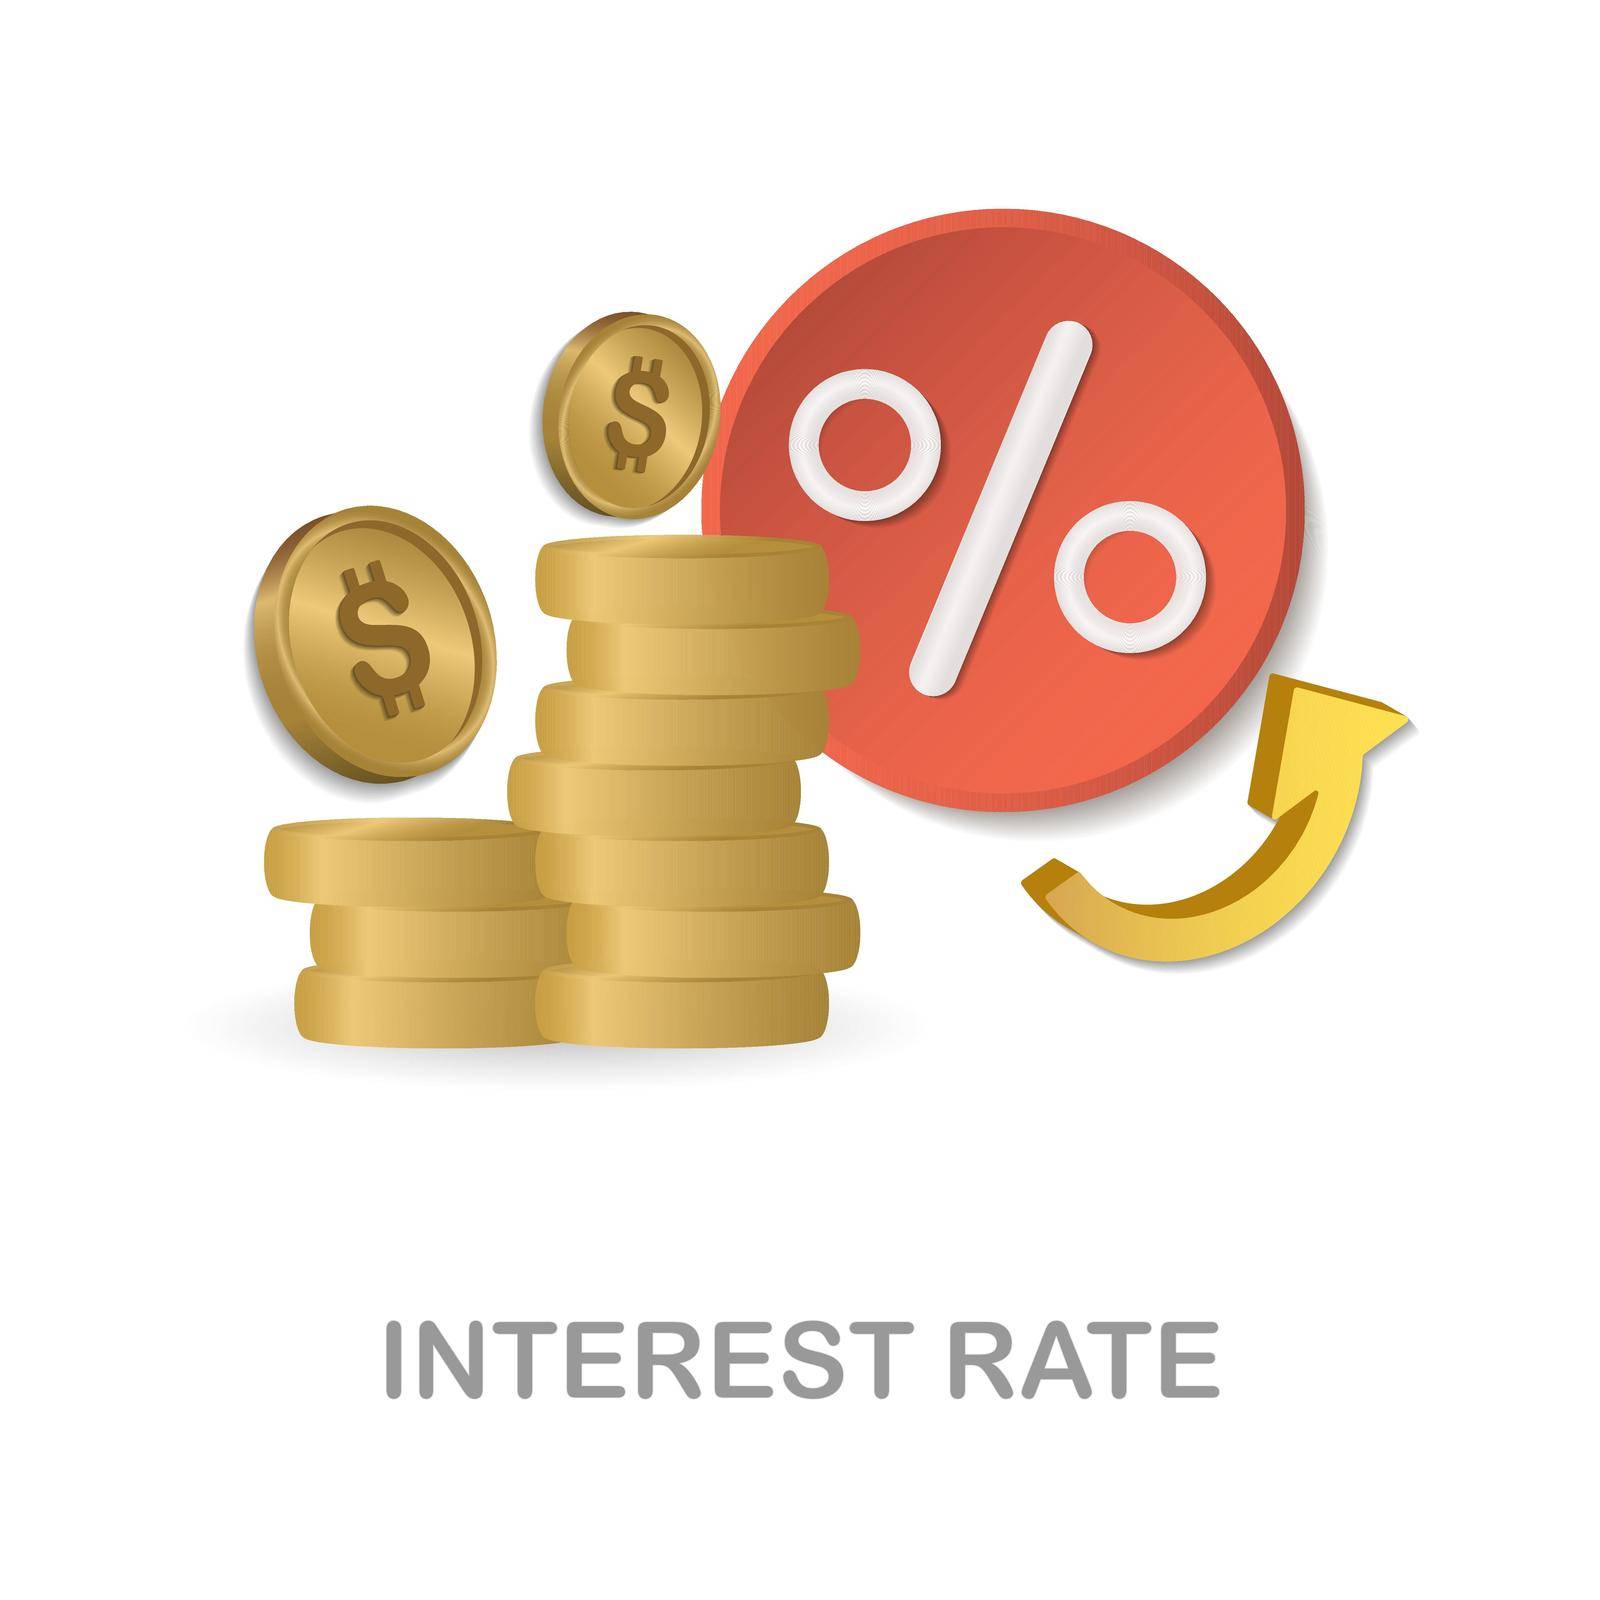 Interest Rate icon. 3d illustration from economic collection. Creative Interest Rate 3d icon for web design, templates, infographics and more by simakovavector